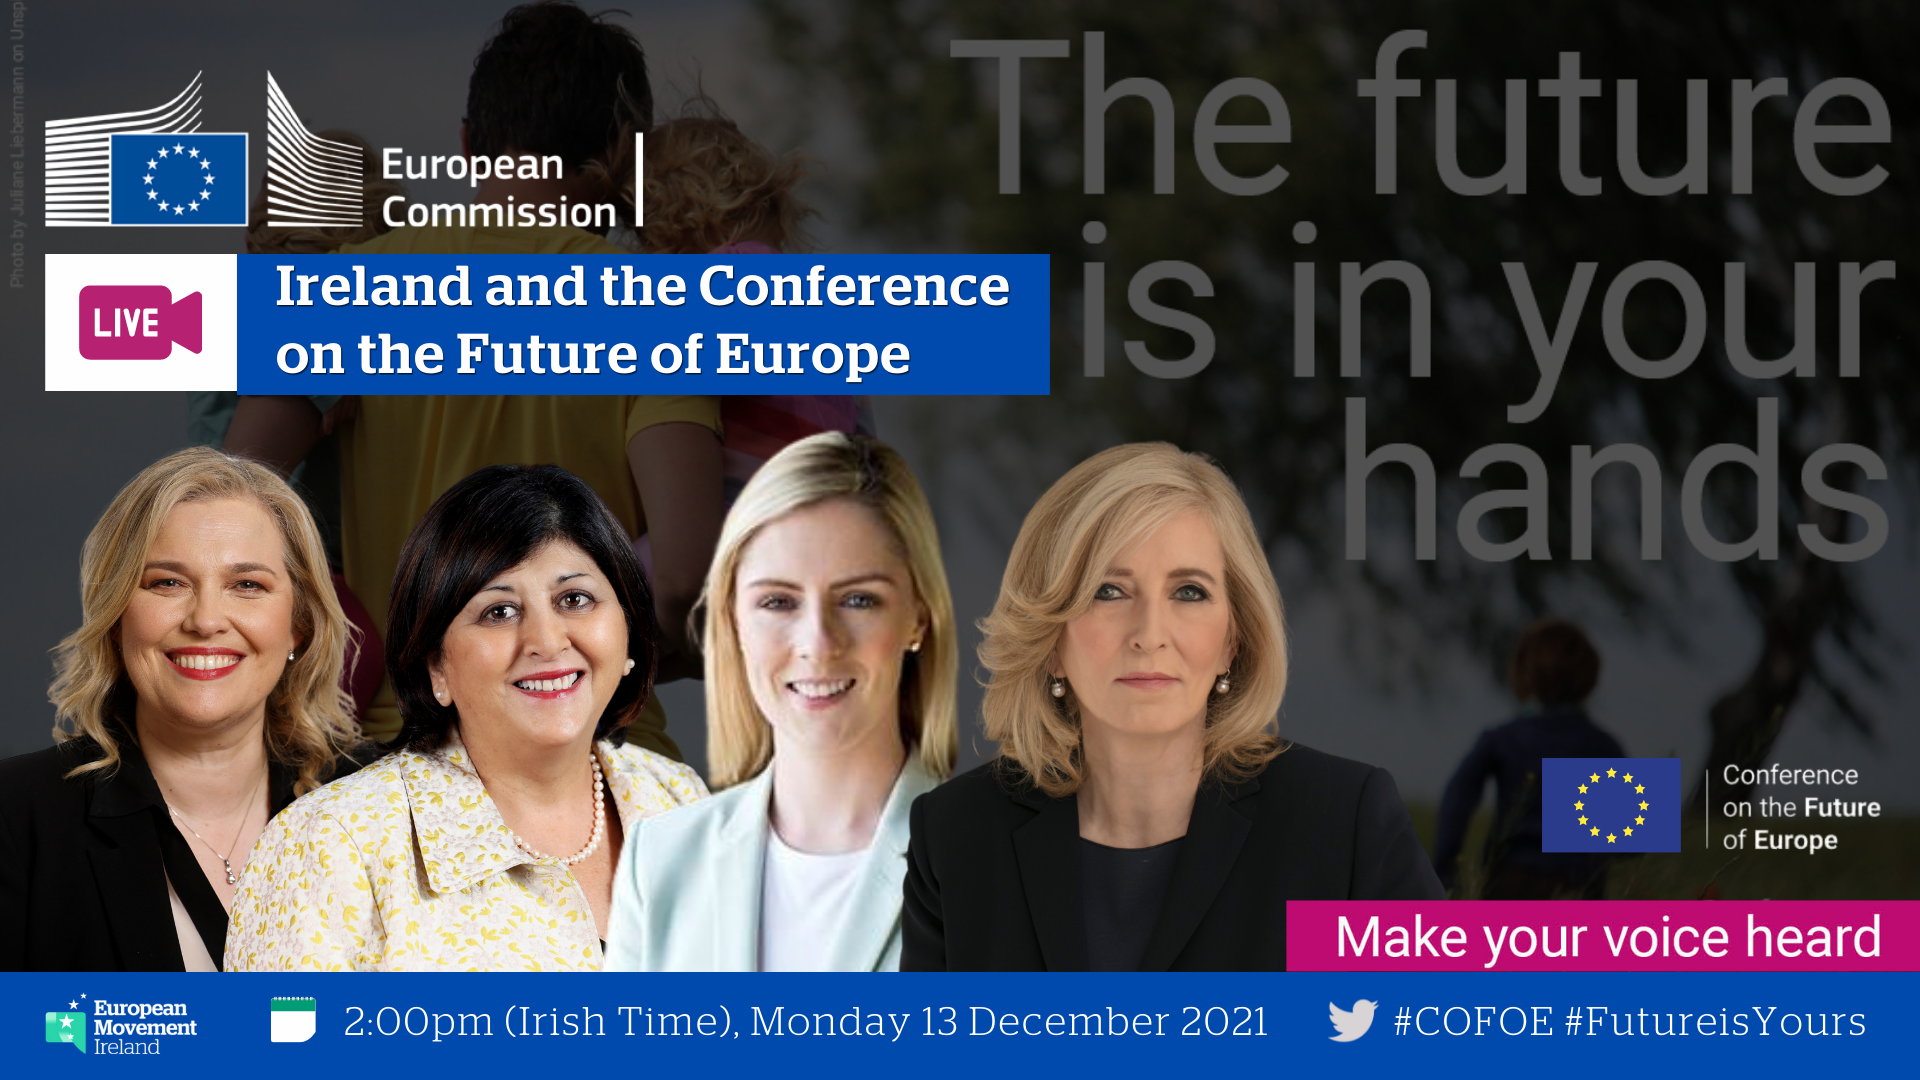 Ireland and the Conference on the Future of Europe - image promoting event on 13 December 2021